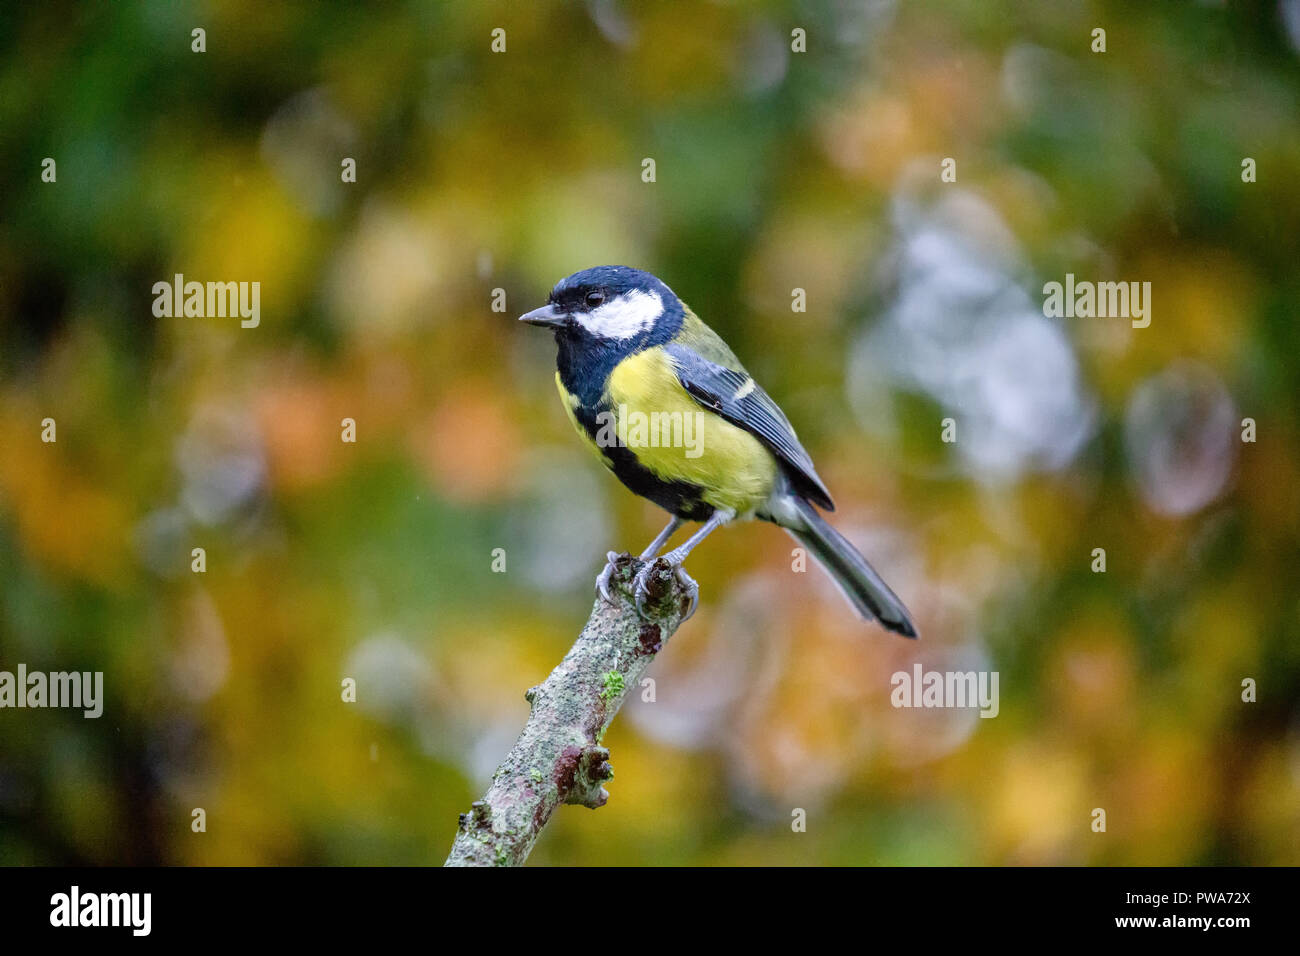 European Great Tit (Parus Major) perched on branch with autumn background, United Kingdom Stock Photo